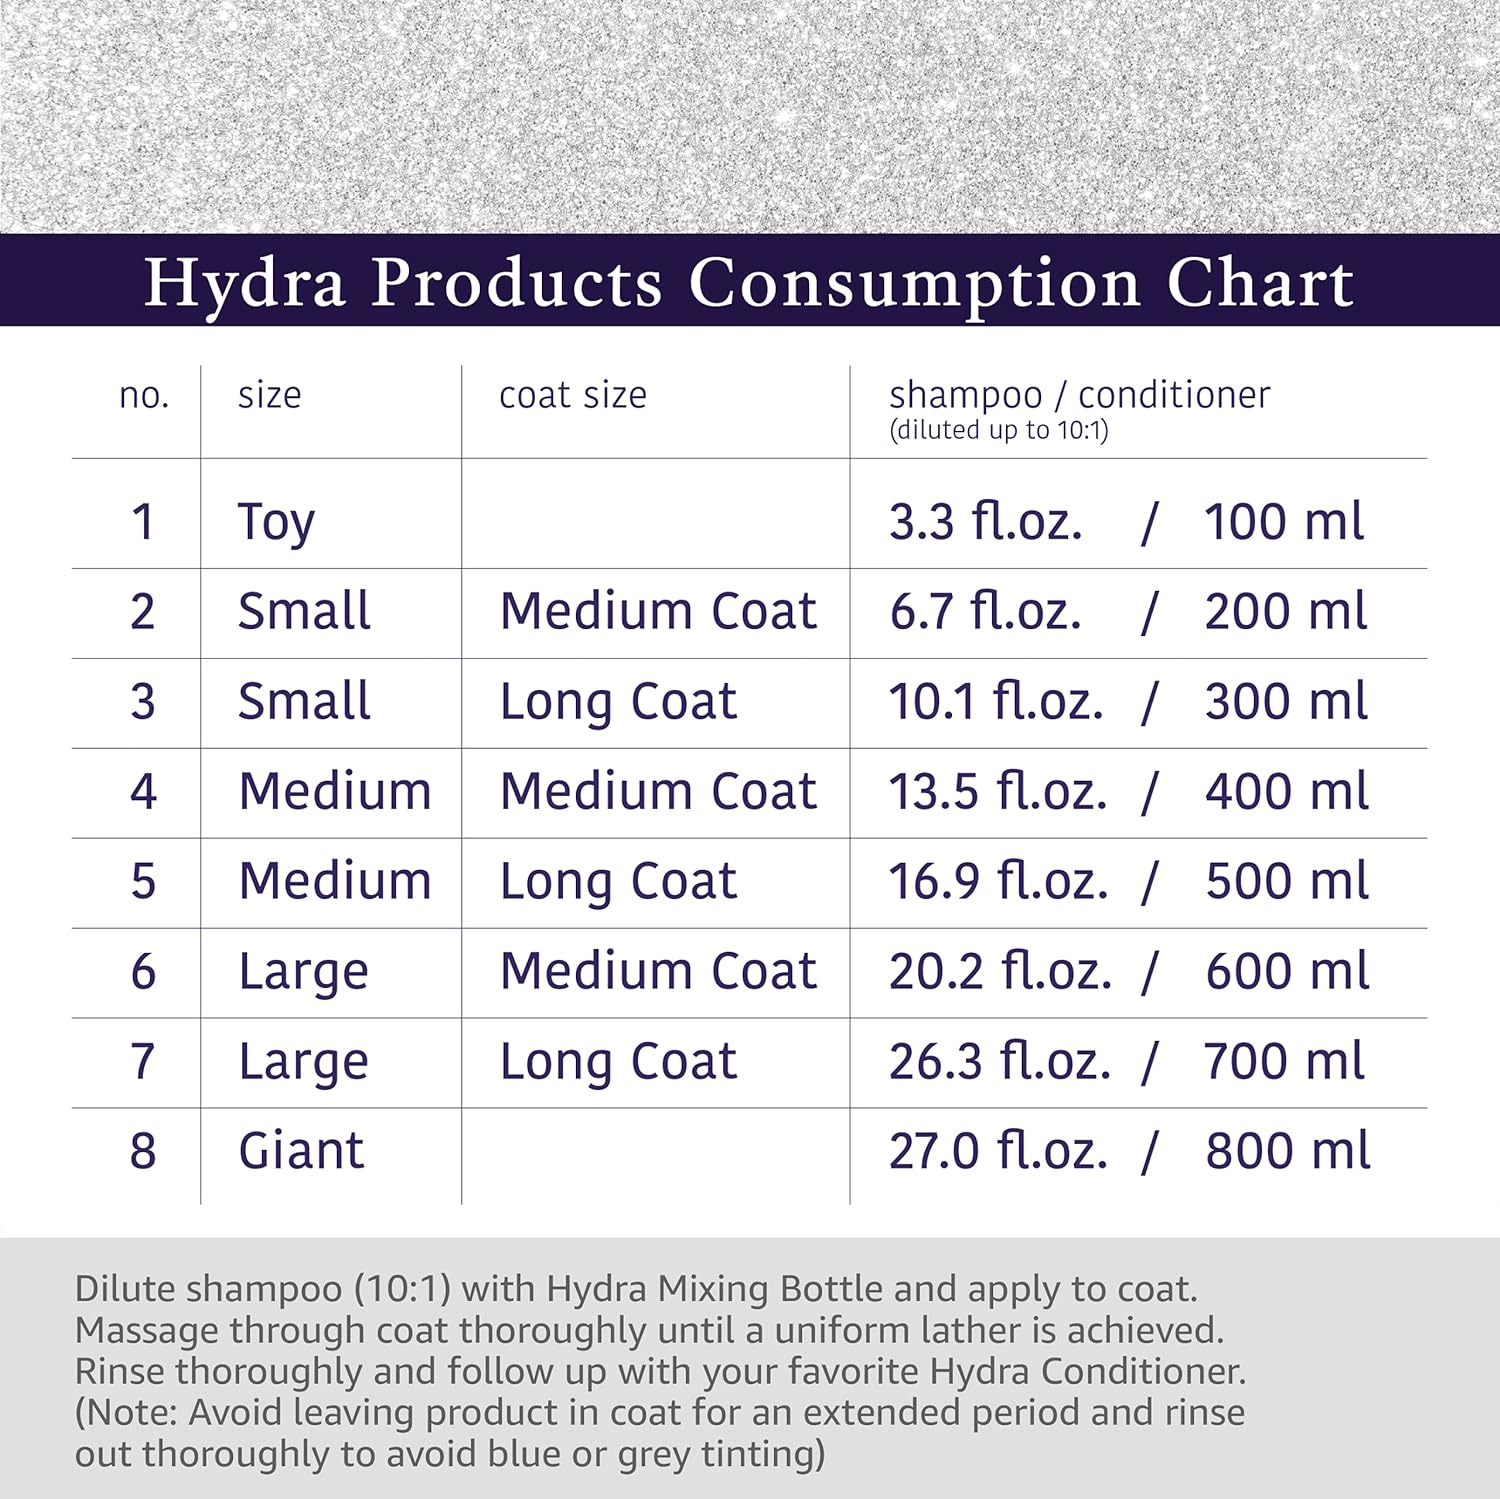 Hydra Groomer's Moisturizing Shampoo 1 Litre for Cats and Dogs Contains Optical Brightener Oatmeal Extract Moisturizes and Softens The Coat pH Balance.…